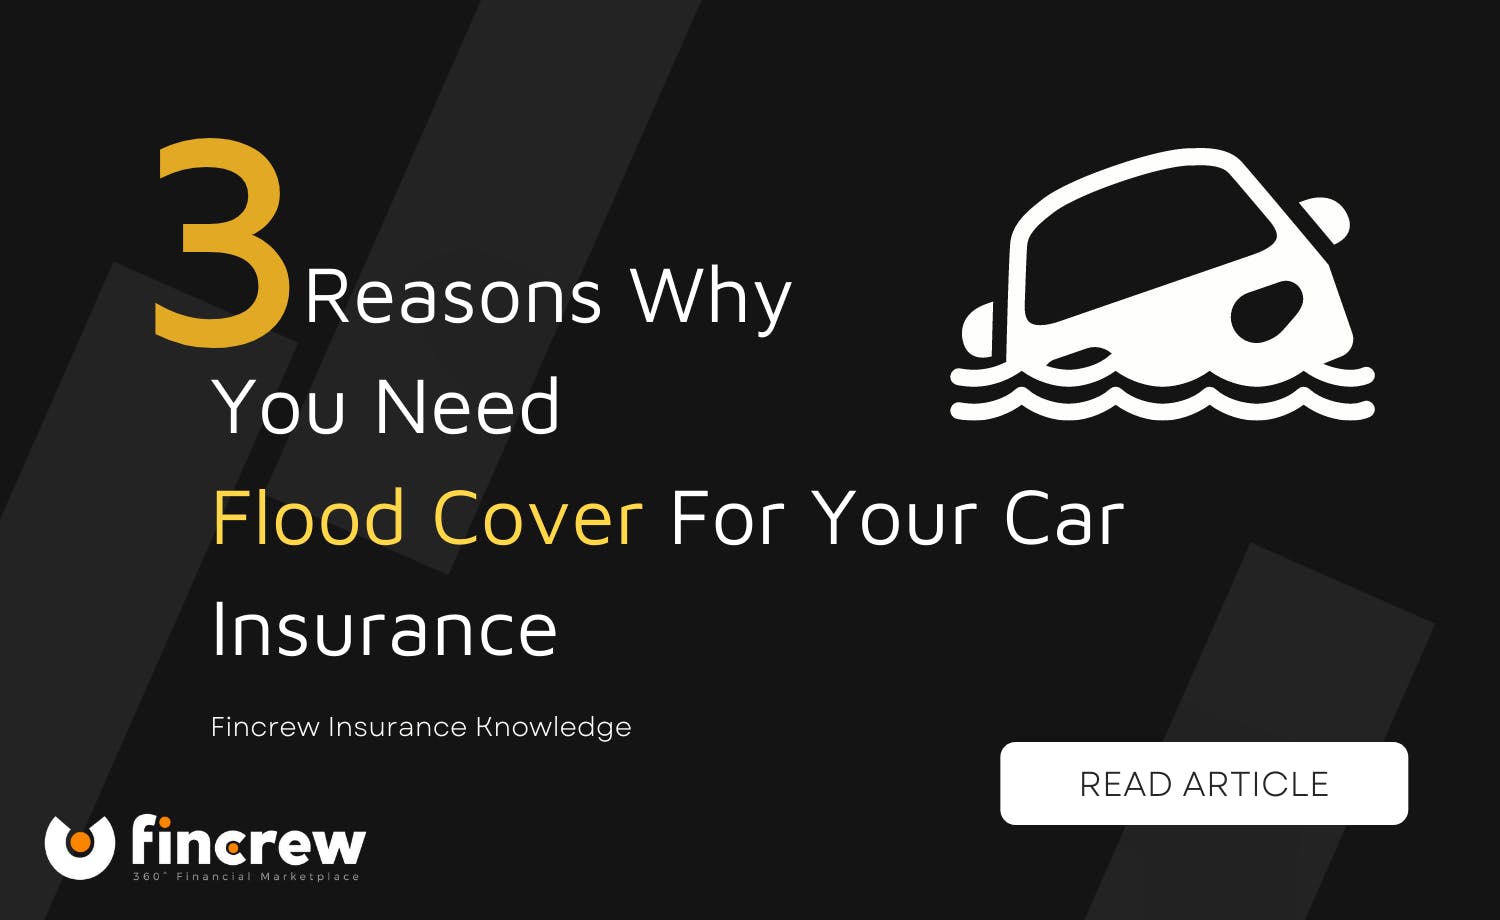 Why You Need Flood Cover For Your Car Insurance